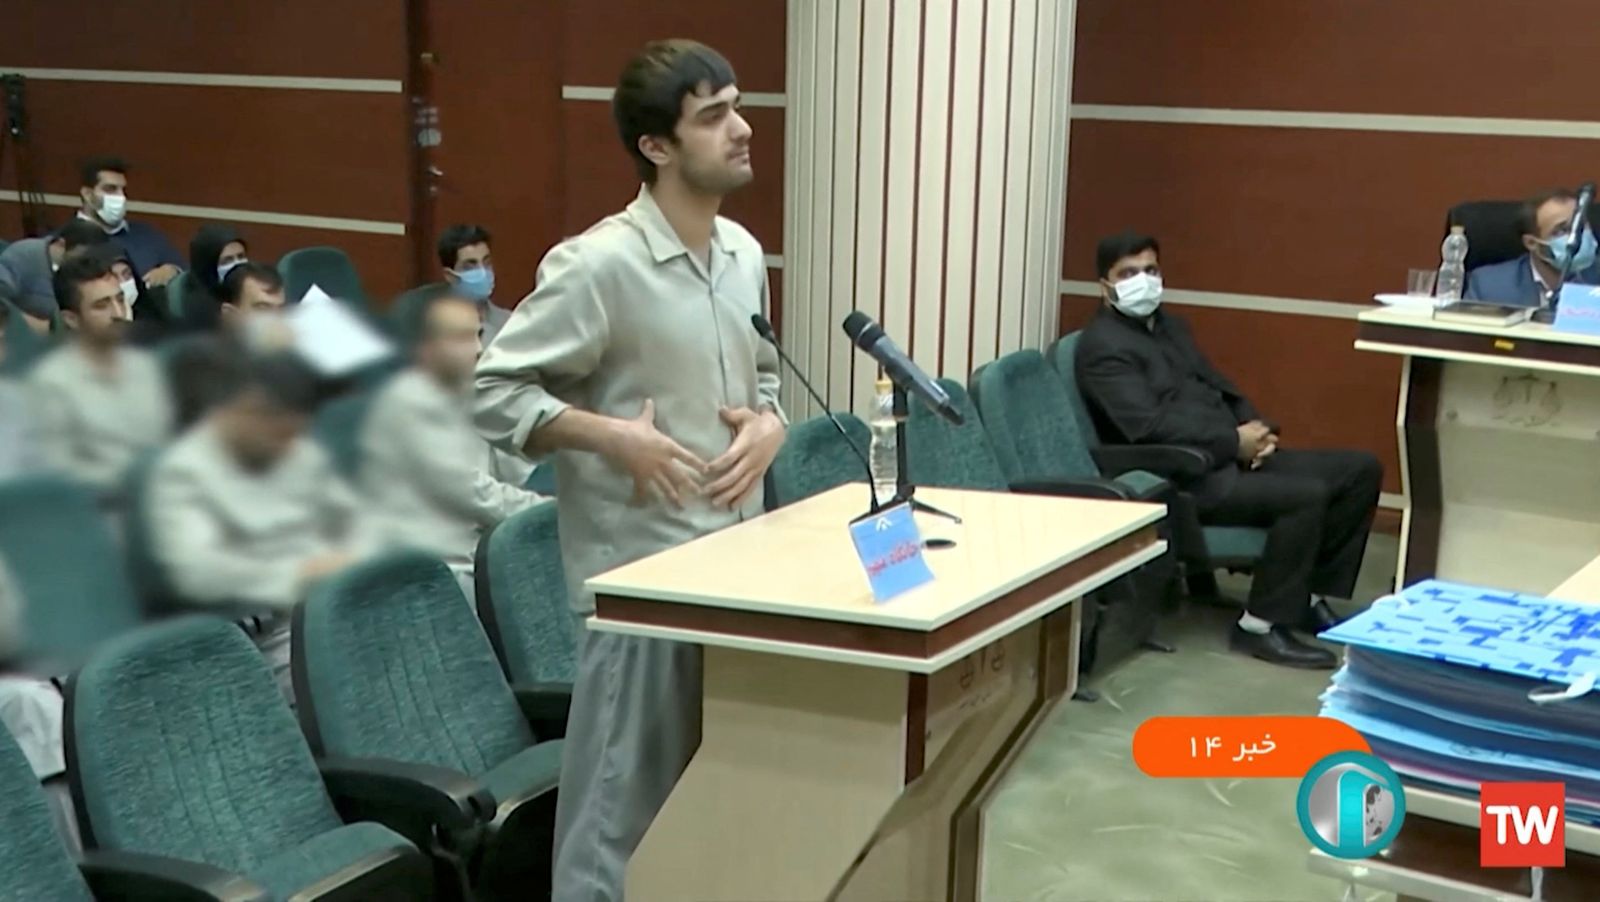 Mohammad-Mehdi Karami speaks in a courtroom before being executed by hanging, along with Seyyed Mohammad Hosseini, for allegedly killing a member of the security forces during nationwide protests that followed the death of 22-year-old Kurdish Iranian woman Mahsa Amini, in Tehran, Iran January 7, 2023 in this still image obtained from a video by WANA (West Asia News Agency)/Handout via REUTERS   ATTENTION EDITORS - THIS PICTURE WAS PROVIDED BY A THIRD PARTY - via REUTERS